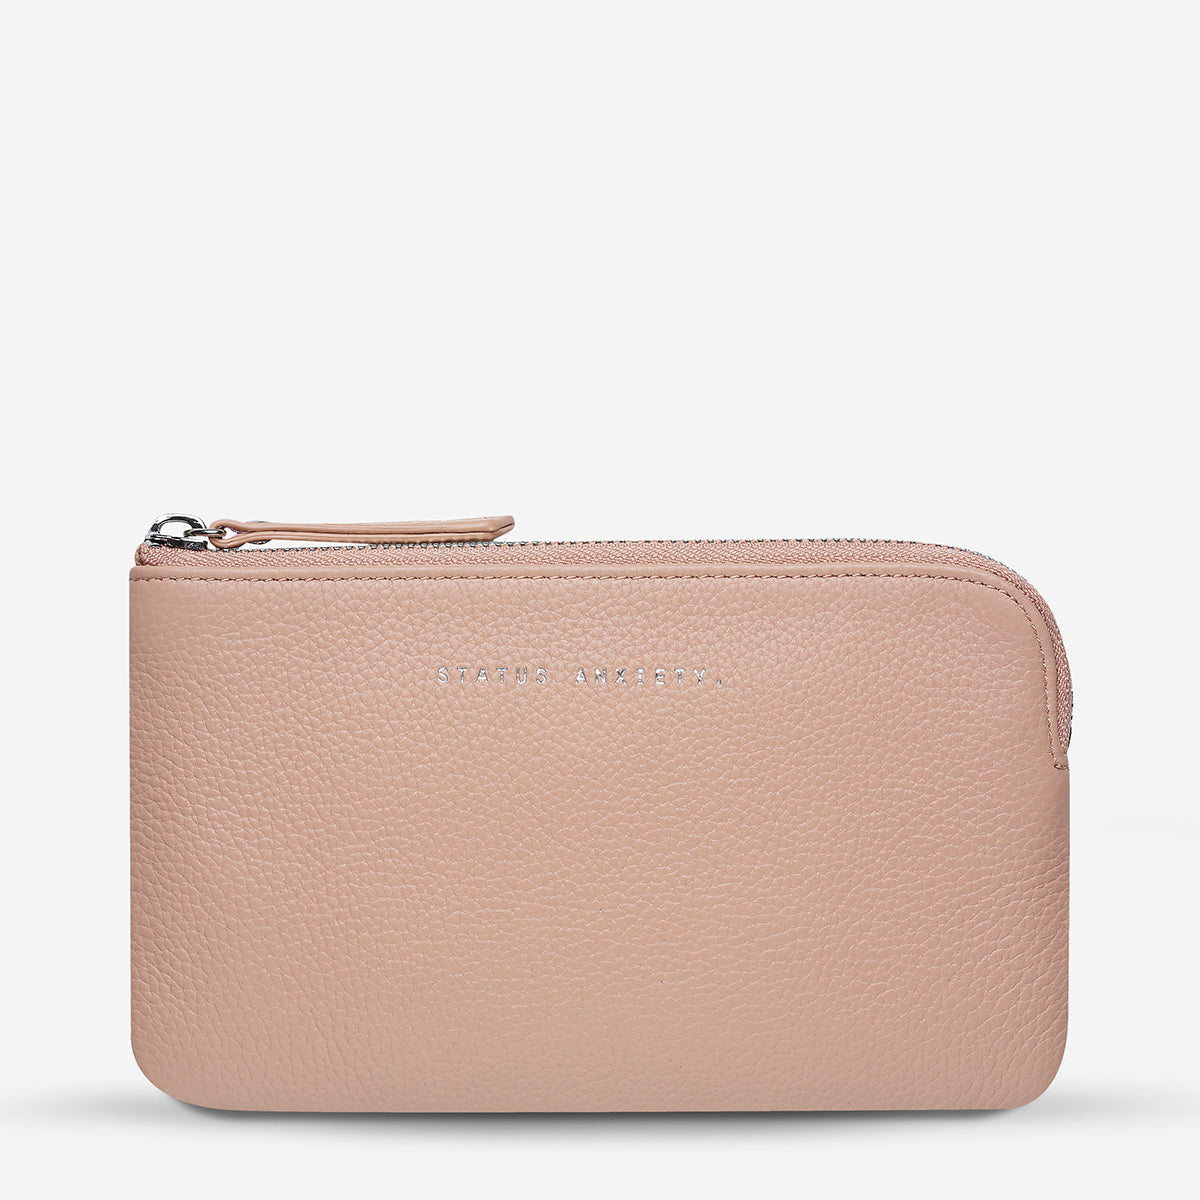 Status Anxiety Smoke and Mirrors Women's Leather Pouch Wallet Dusty Pink